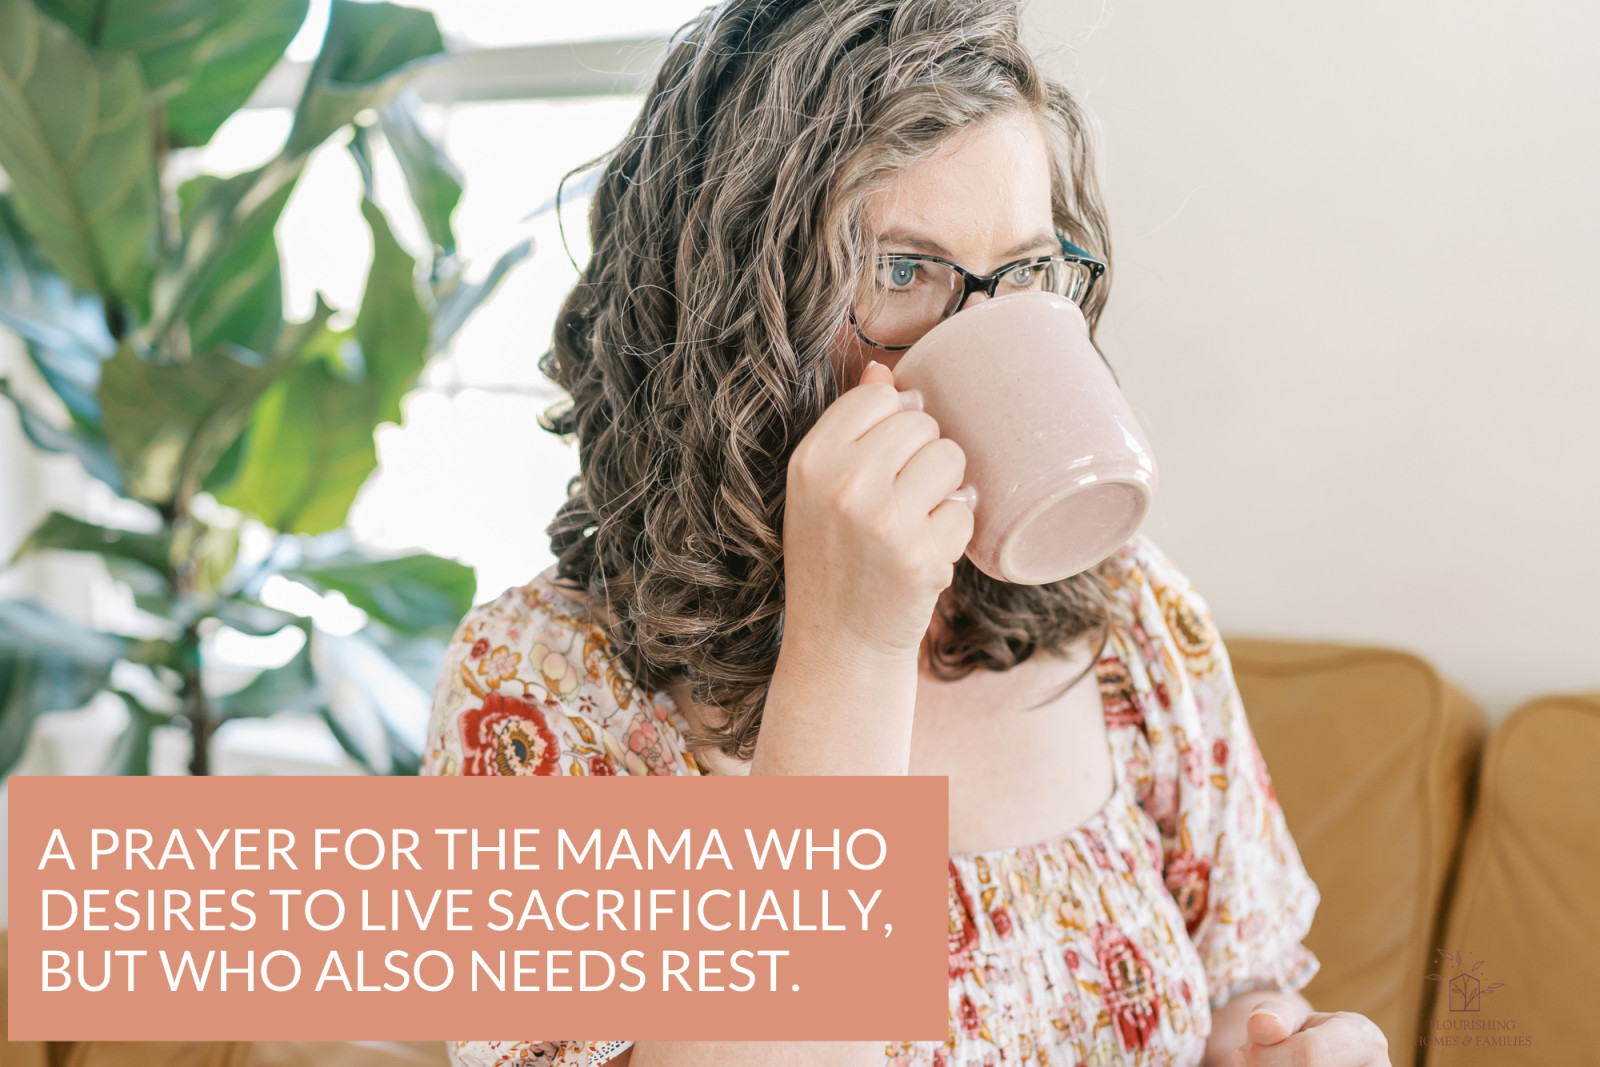 A prayer for the mama who desires to live sacrificially, but who also needs rest